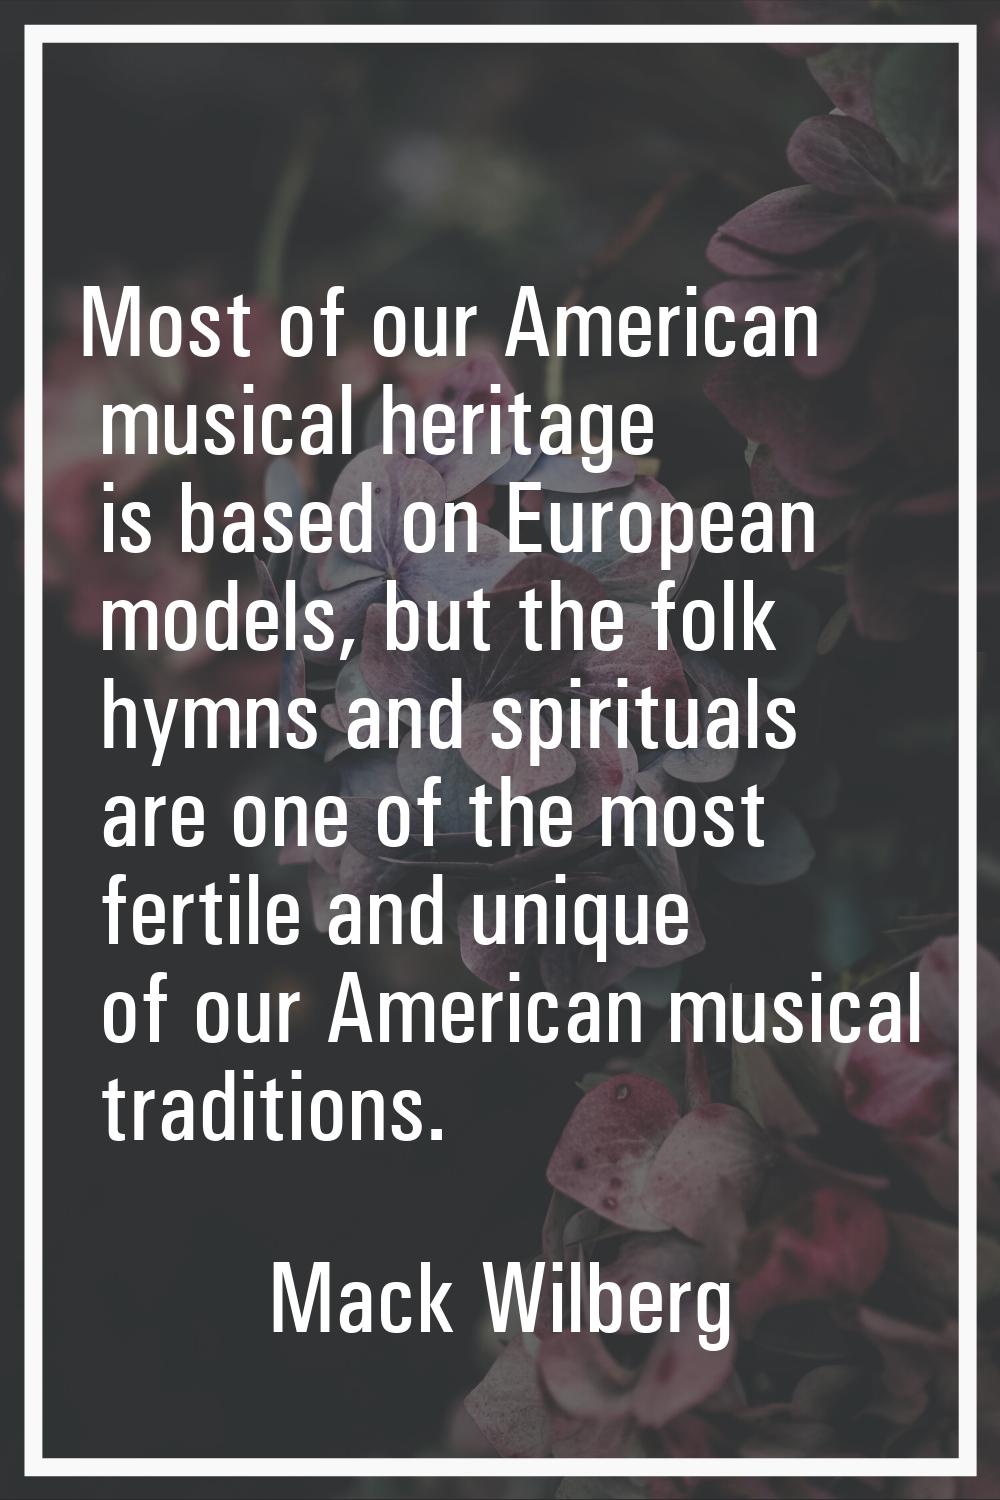 Most of our American musical heritage is based on European models, but the folk hymns and spiritual